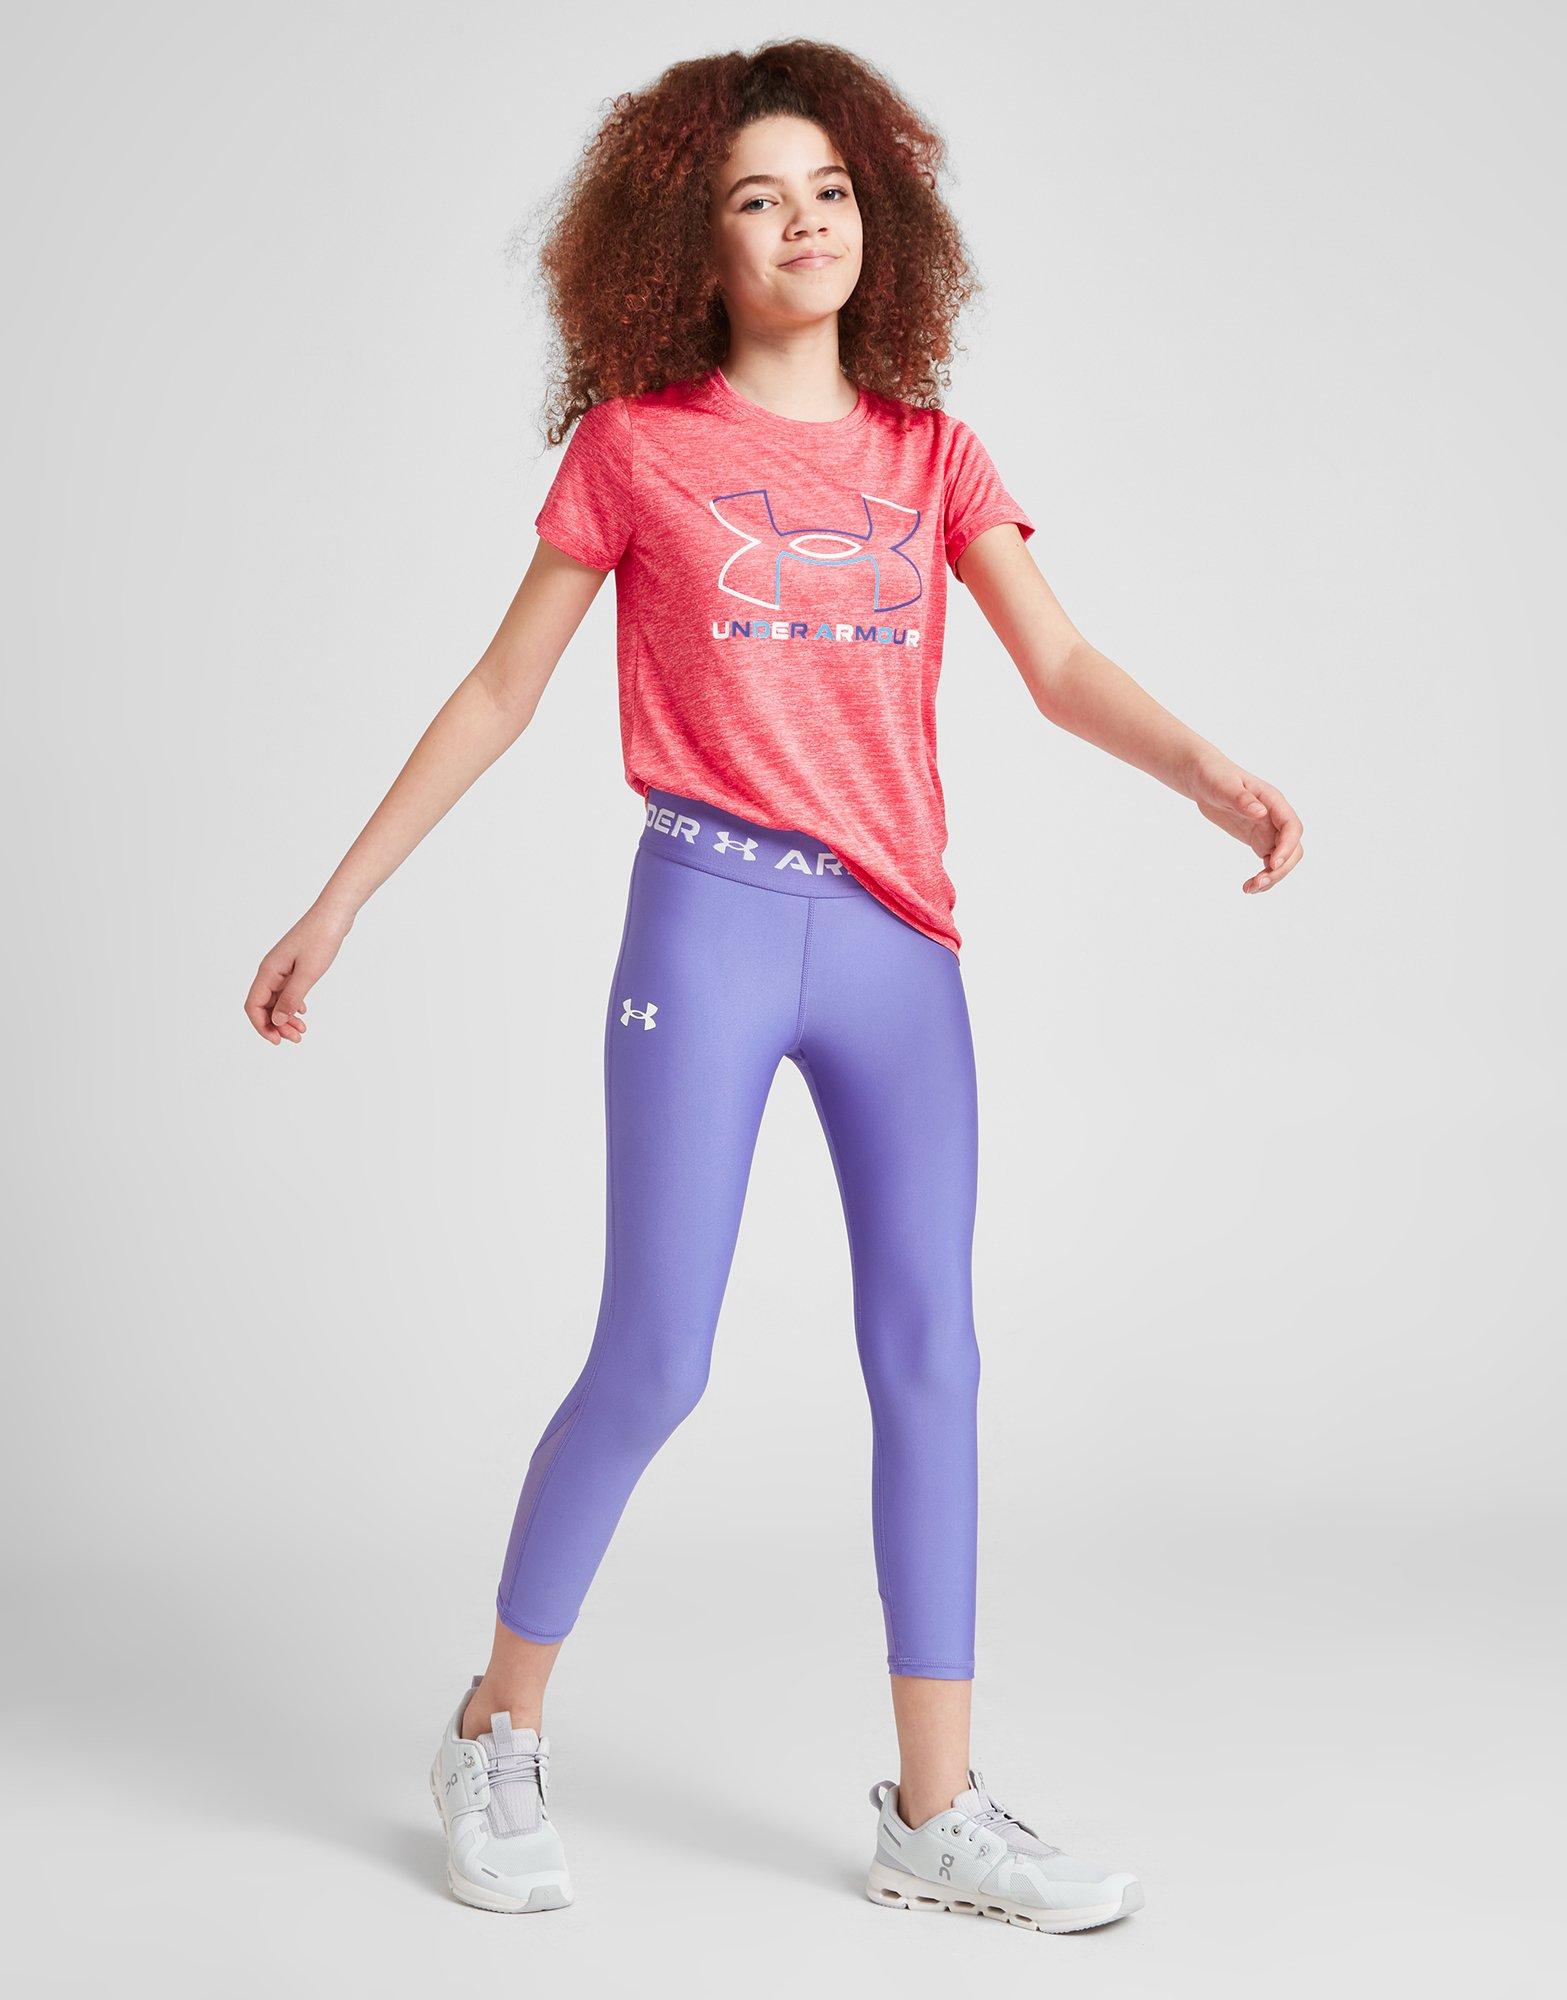 Blue Under Armour Girls' Fitness Crop Tights Junior - JD Sports Global